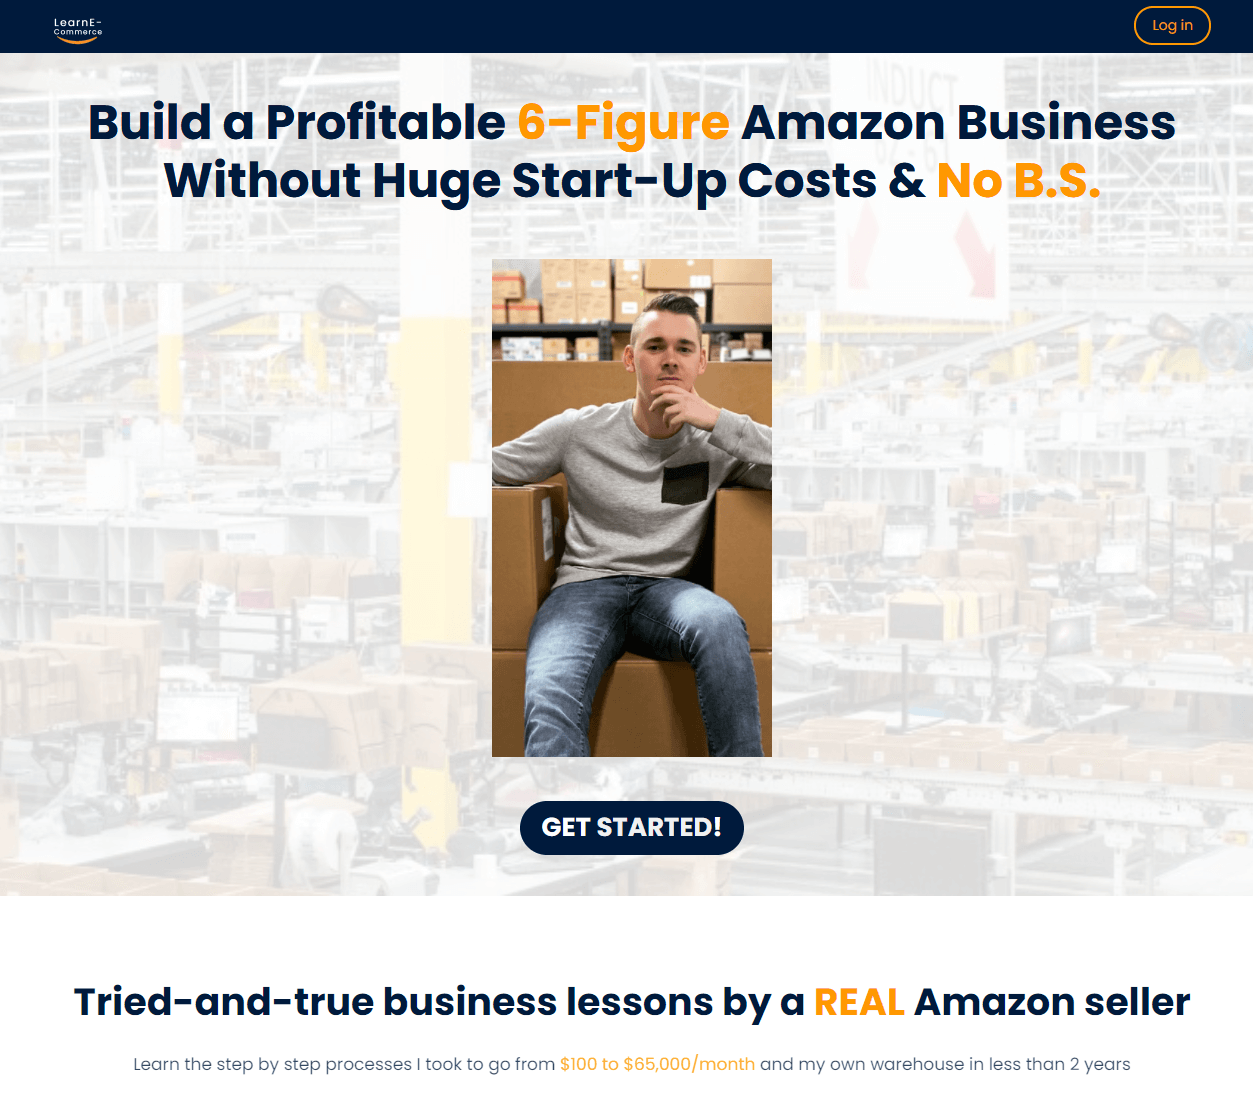 Learn Ecommerce's website showing a man on boxes.